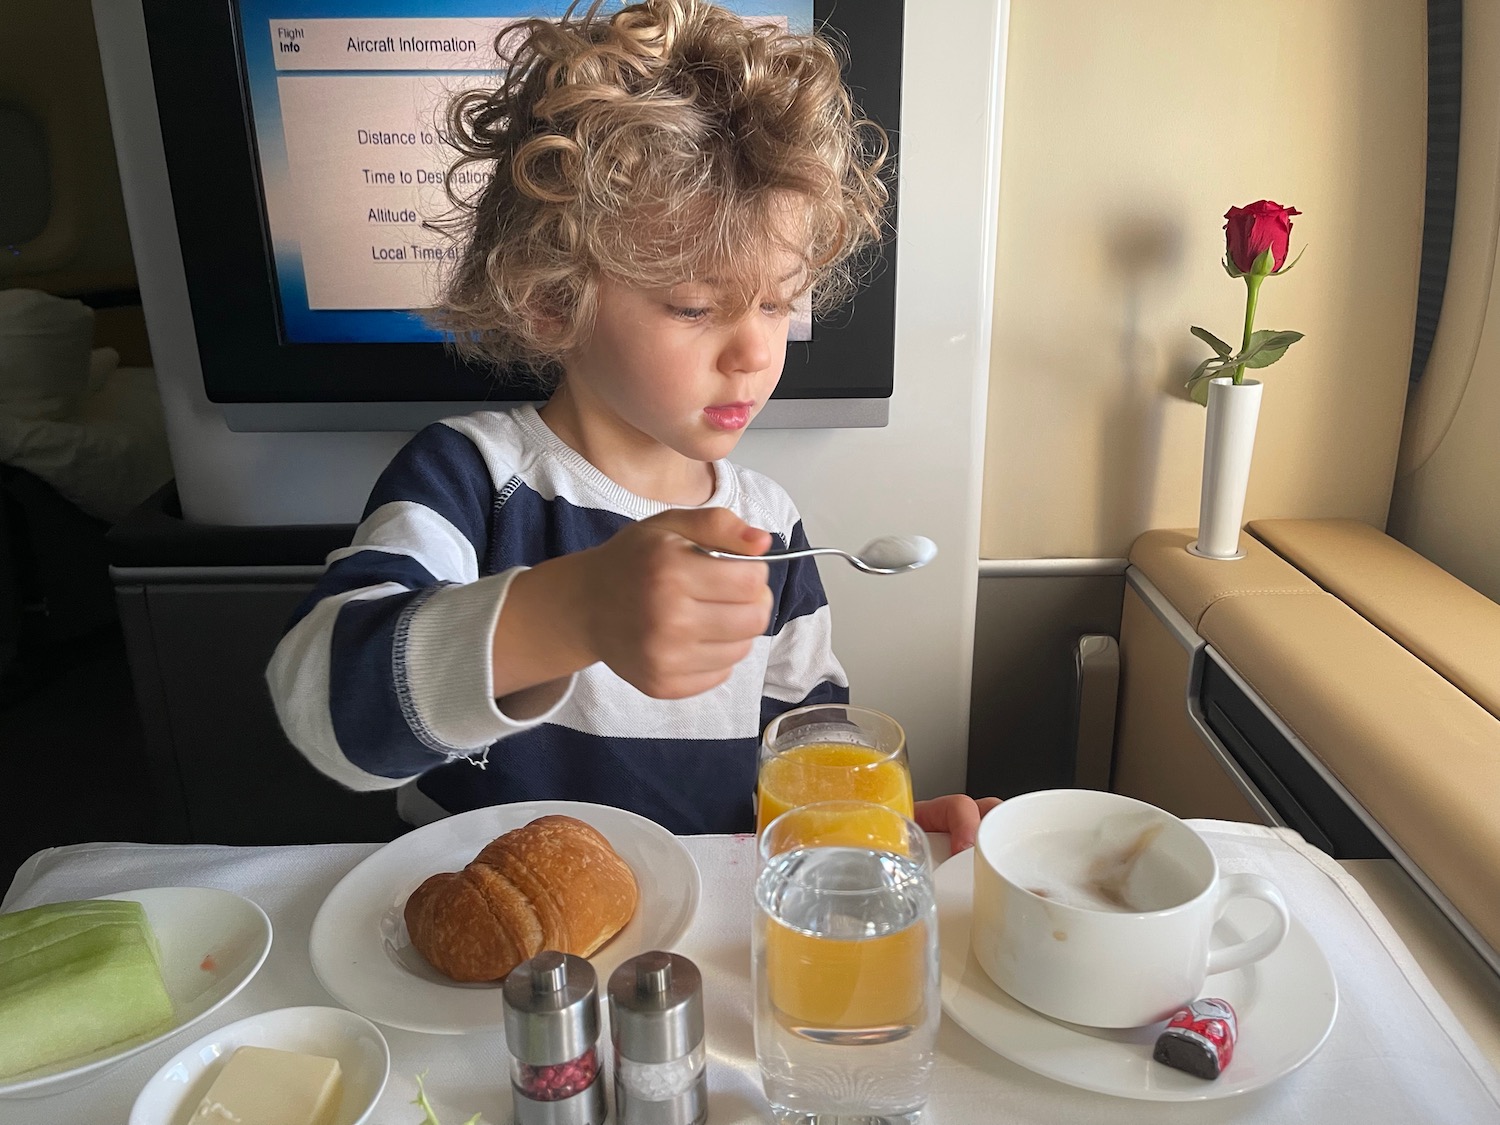 a child eating breakfast on an airplane